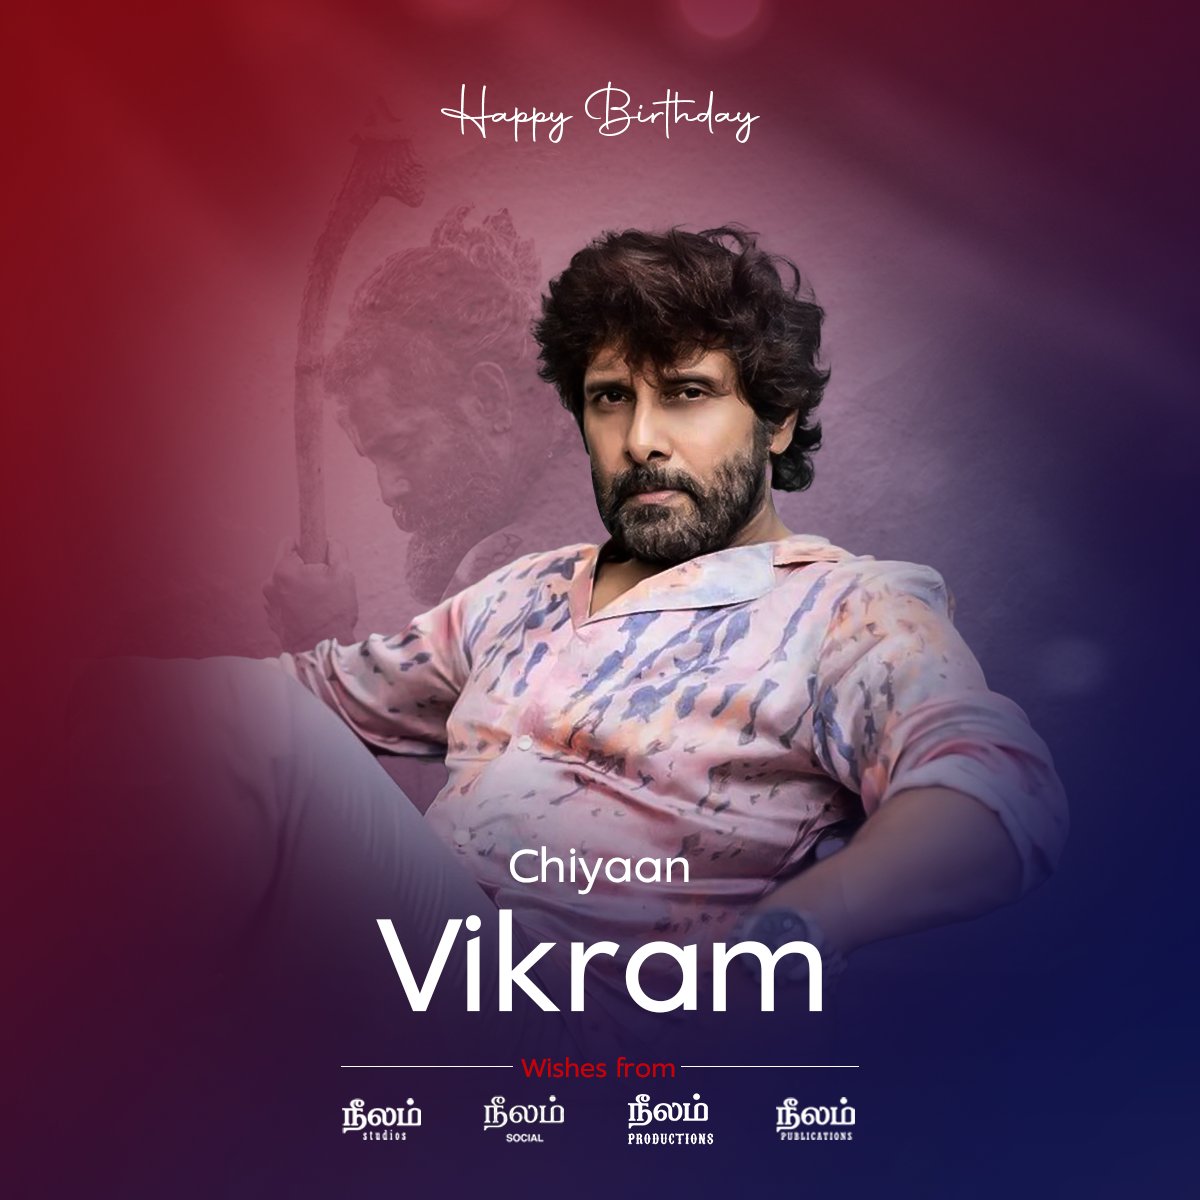 Happy birthday to our very own #Thangalaan, @chiyaan #Vikram sir✨ May your day be as legendary as your performances and as magical as your on-screen presence! #HBDChiyaan #HBDVikram